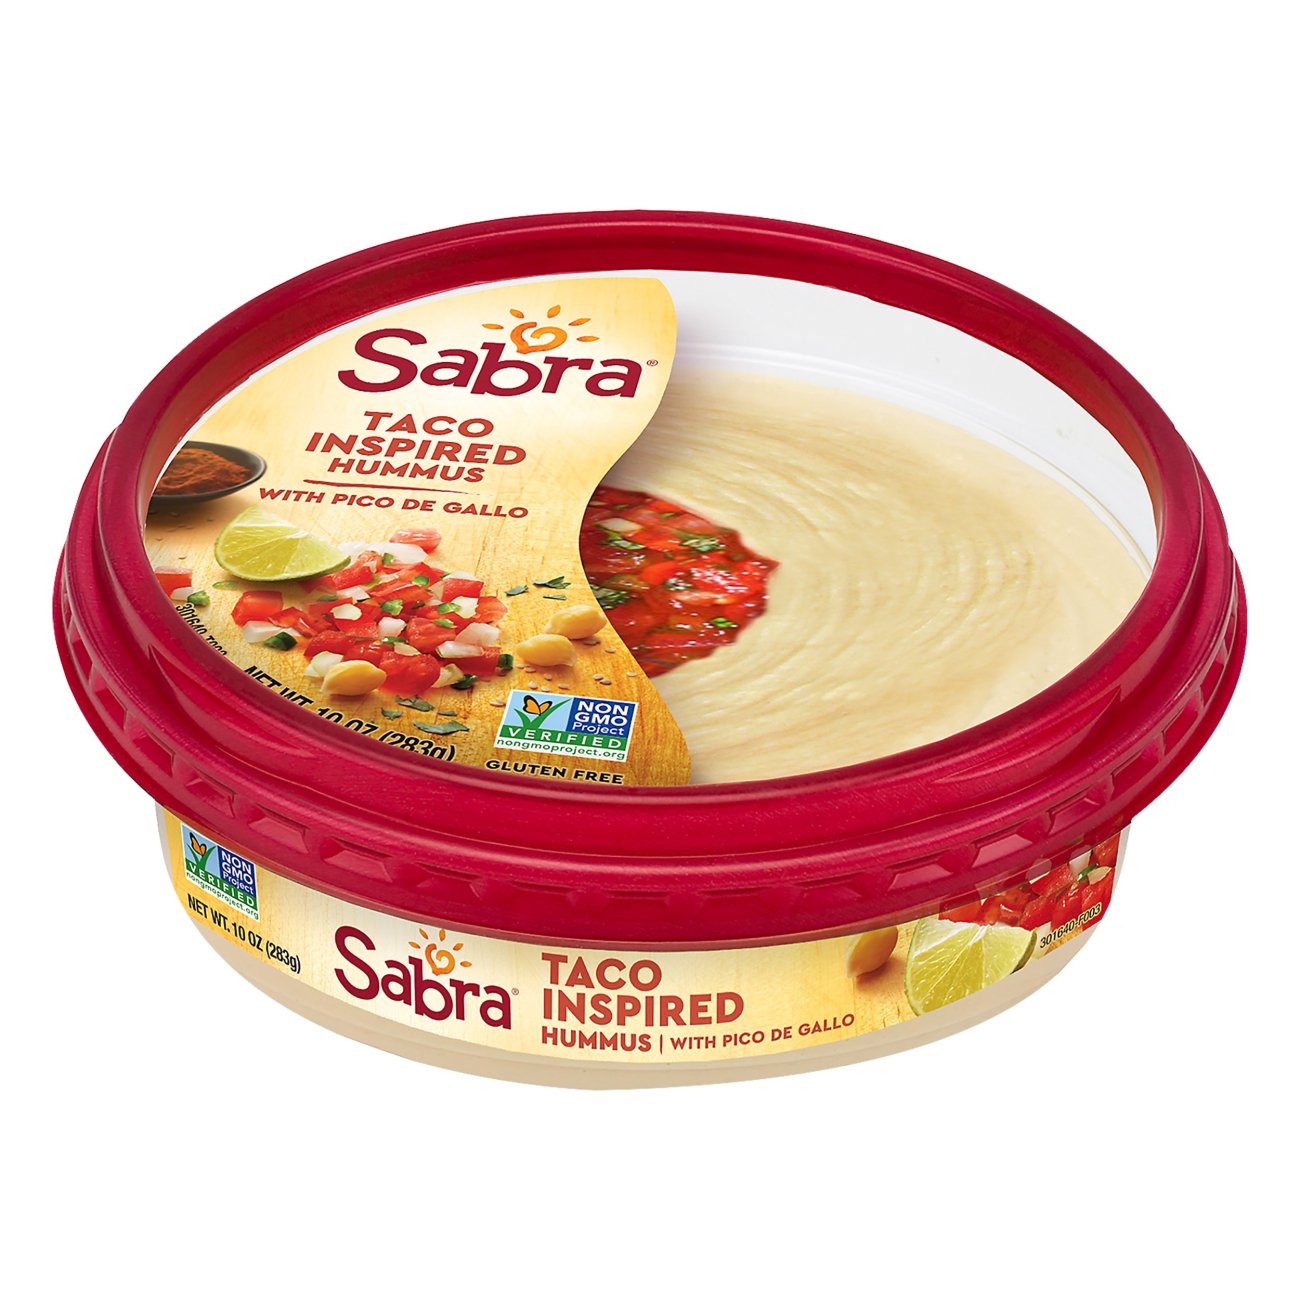 Sabra Hummus Taco Inspired Shop Dip At H E B,How To Inject A Turkey With Butter